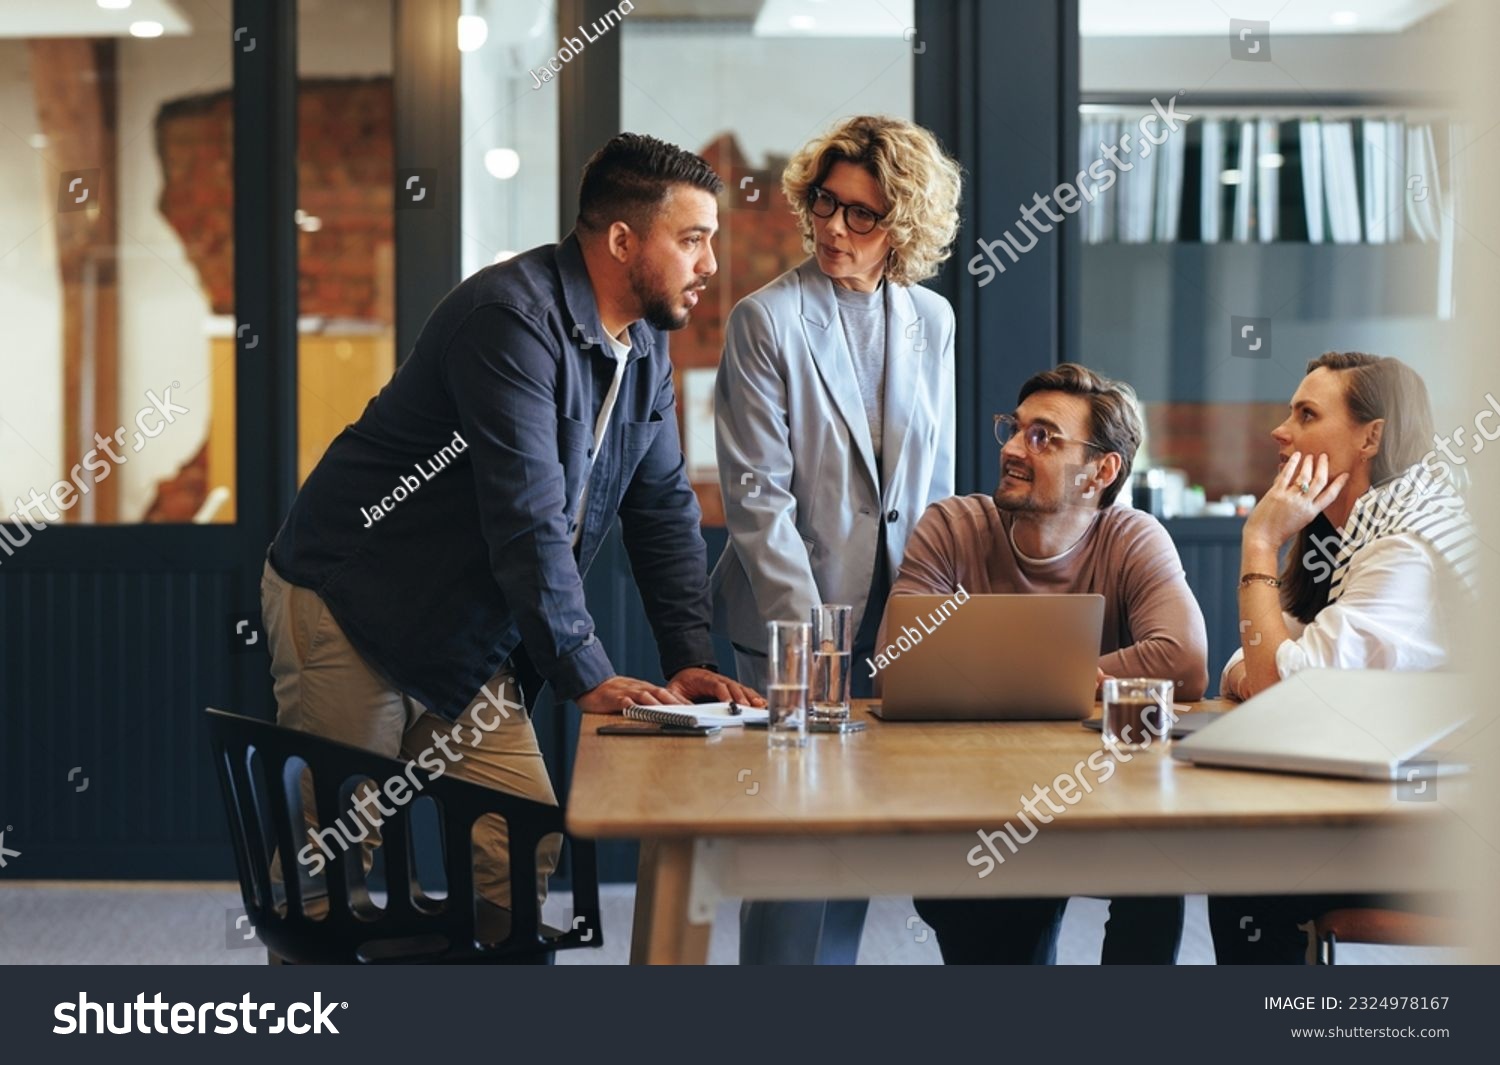 Team of professionals having a meeting in a digital marketing agency. Business people discussing a project in an office. Teamwork and collaboration in a creative workplace. #2324978167